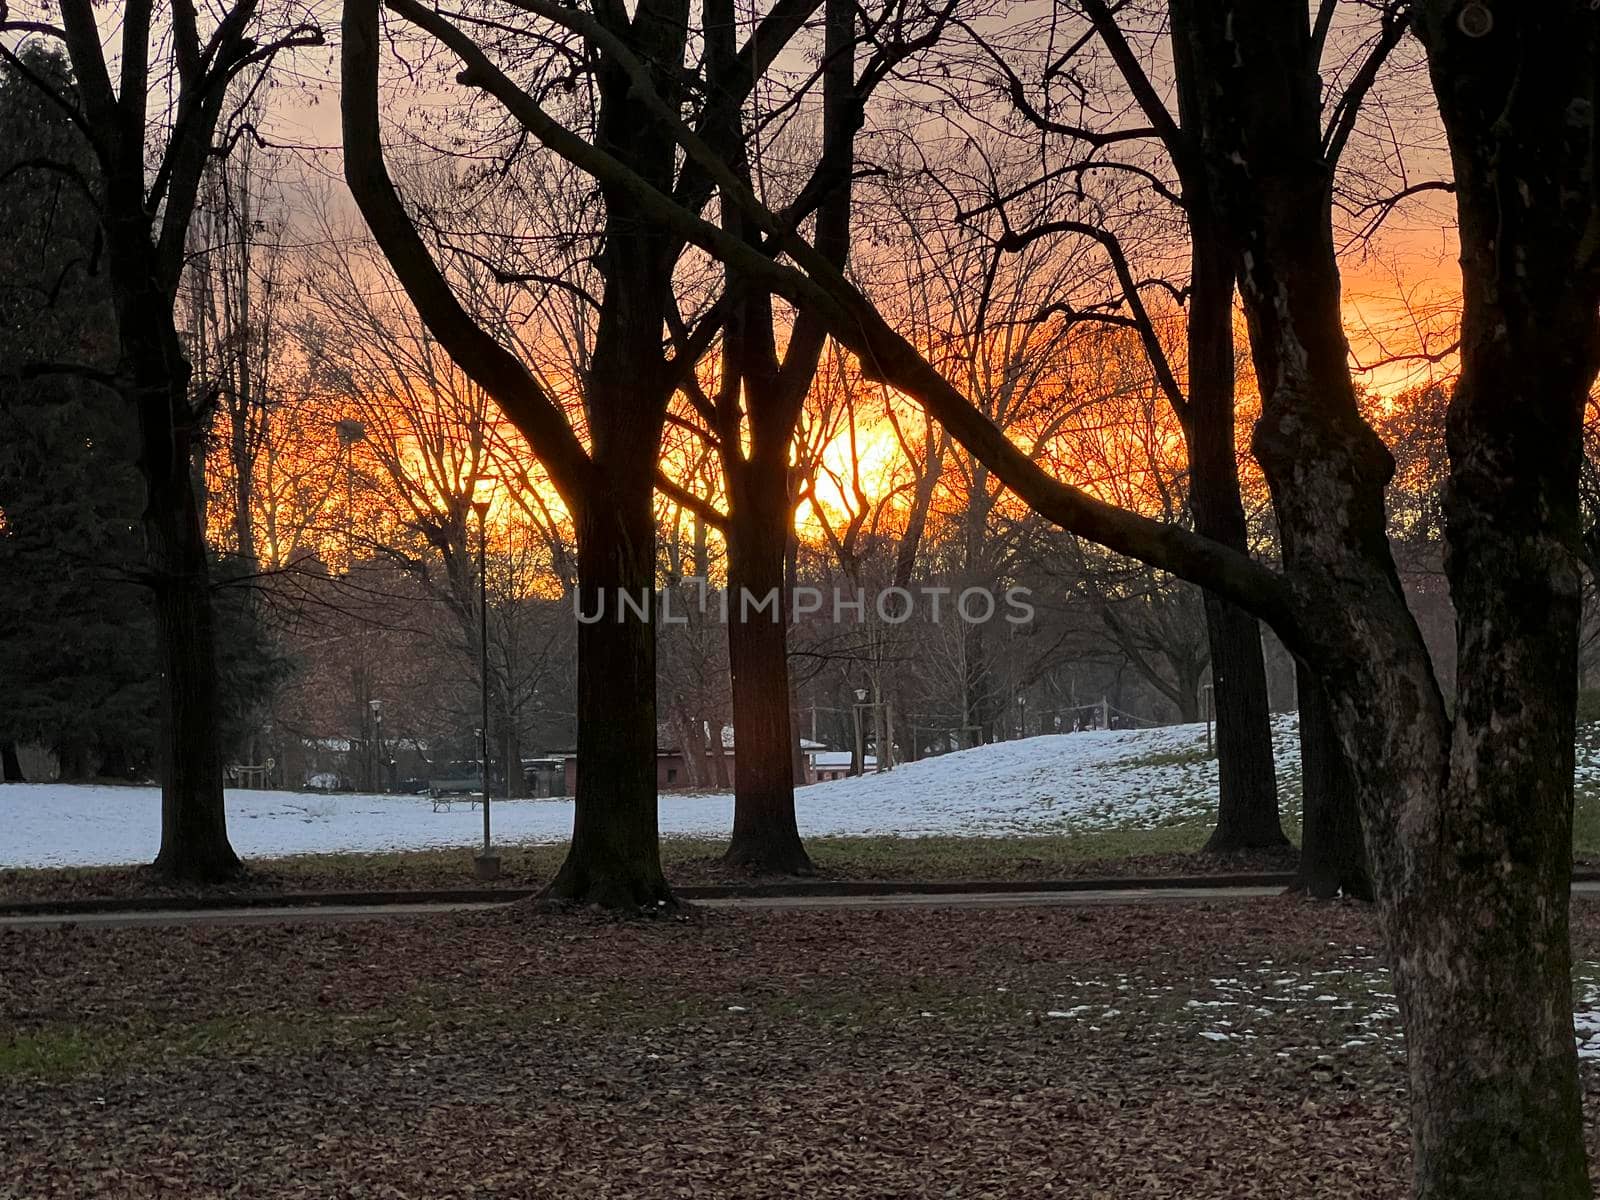 Pellerina park in Turin sunset with snow by tinofotografie